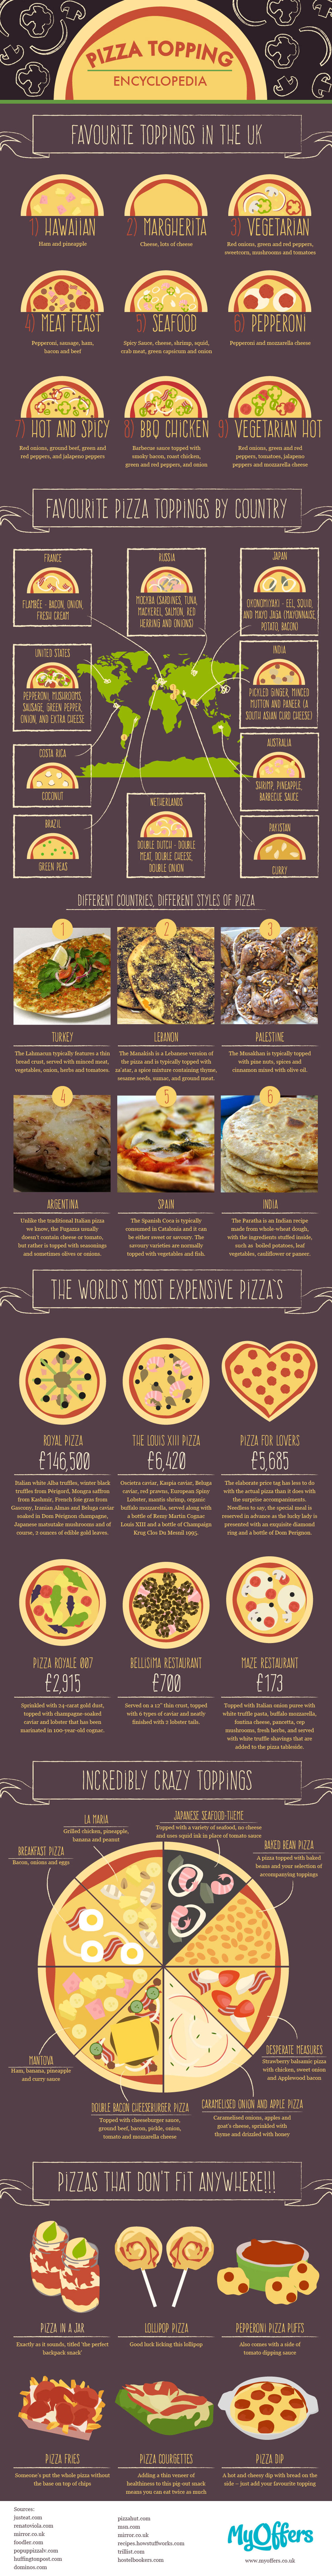 Pizza Topping Encyclopedia - Food Infographic